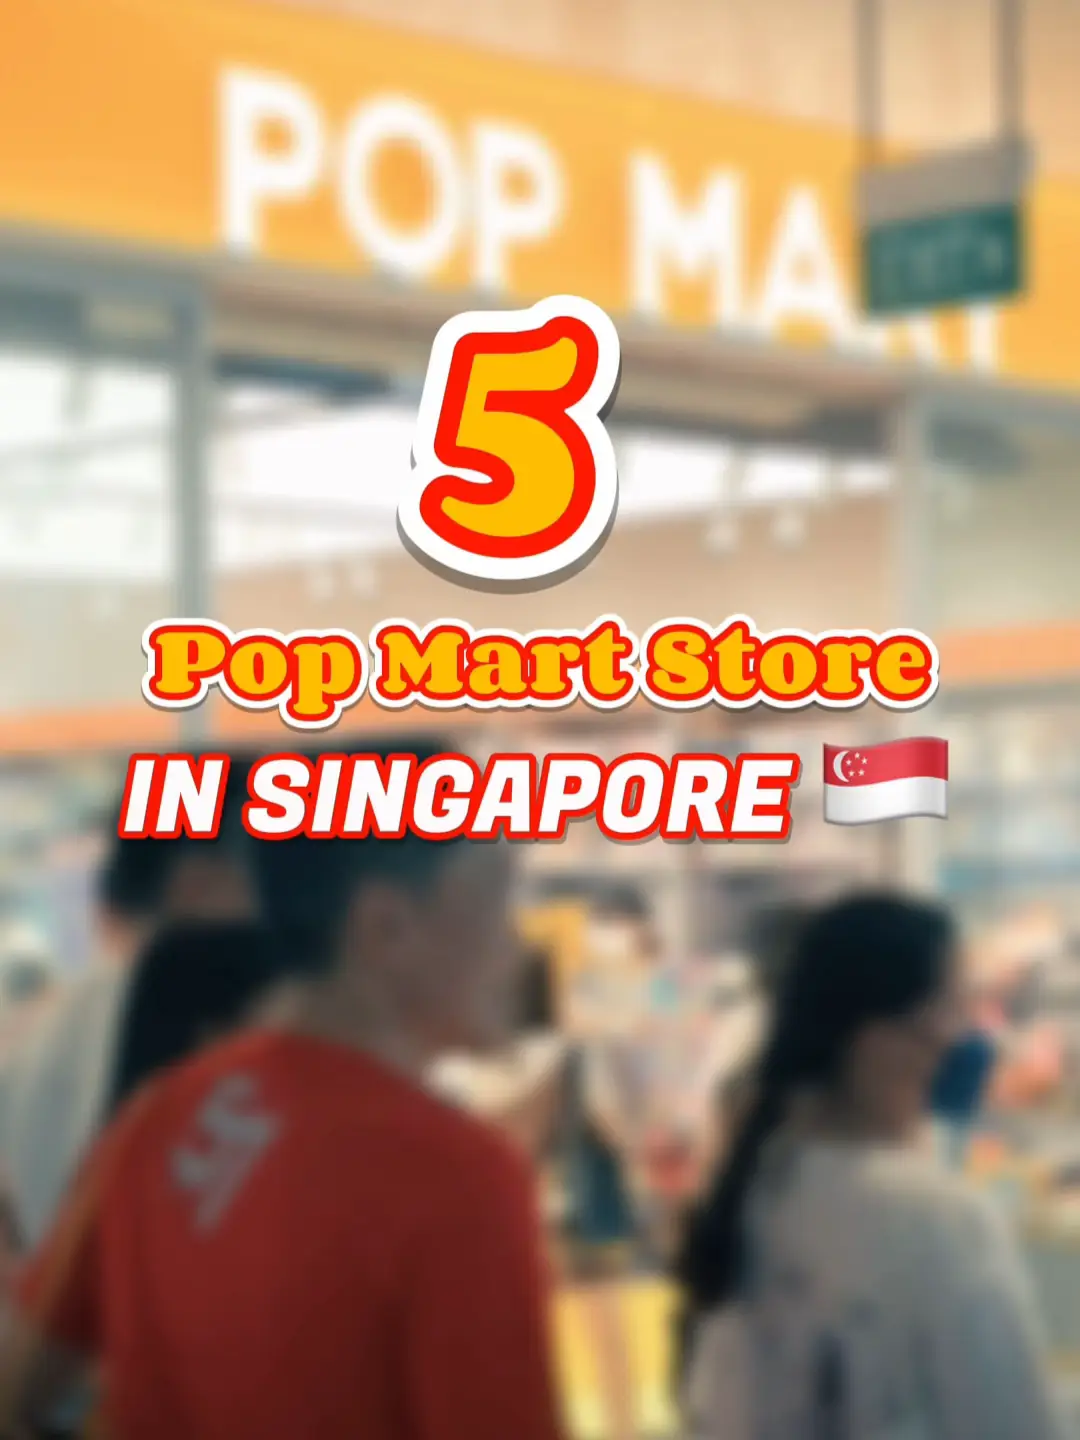 5 Pop Mart Stores in Singapore 🇸🇬 You Must Visit! 's images